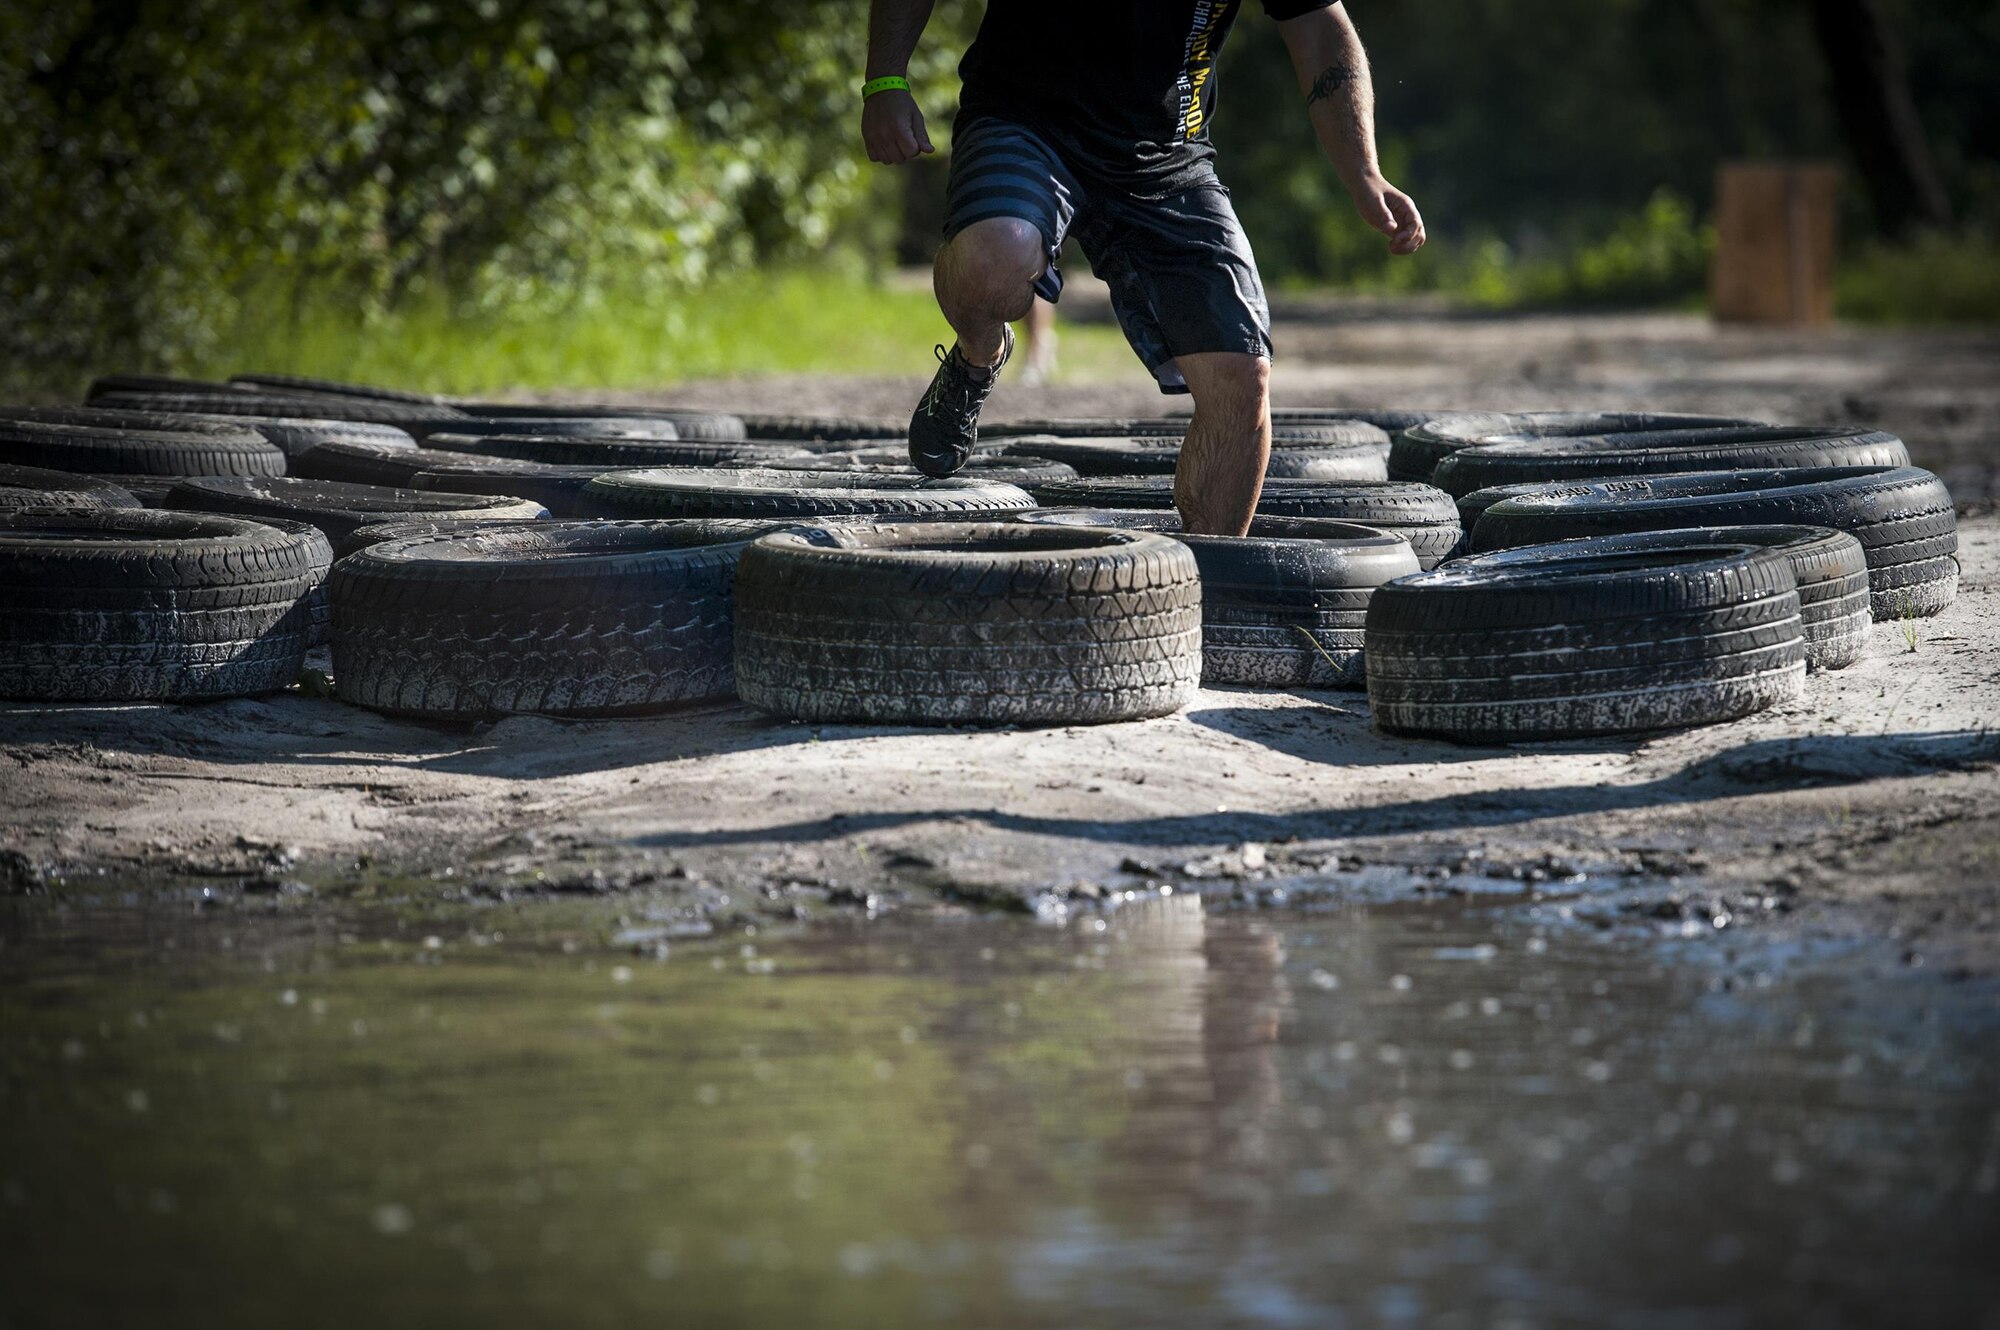 A contestant runs through tires during the 2016 Moody Mudder, May 7, 2016, in Ray City, Ga. During the race, the runners faced obstacles such as tires, monkey bars, a fire pit, and a low-crawl under barbwire. (U.S. Air Force photo by Airman 1st Class Lauren M. Hunter/Released)
